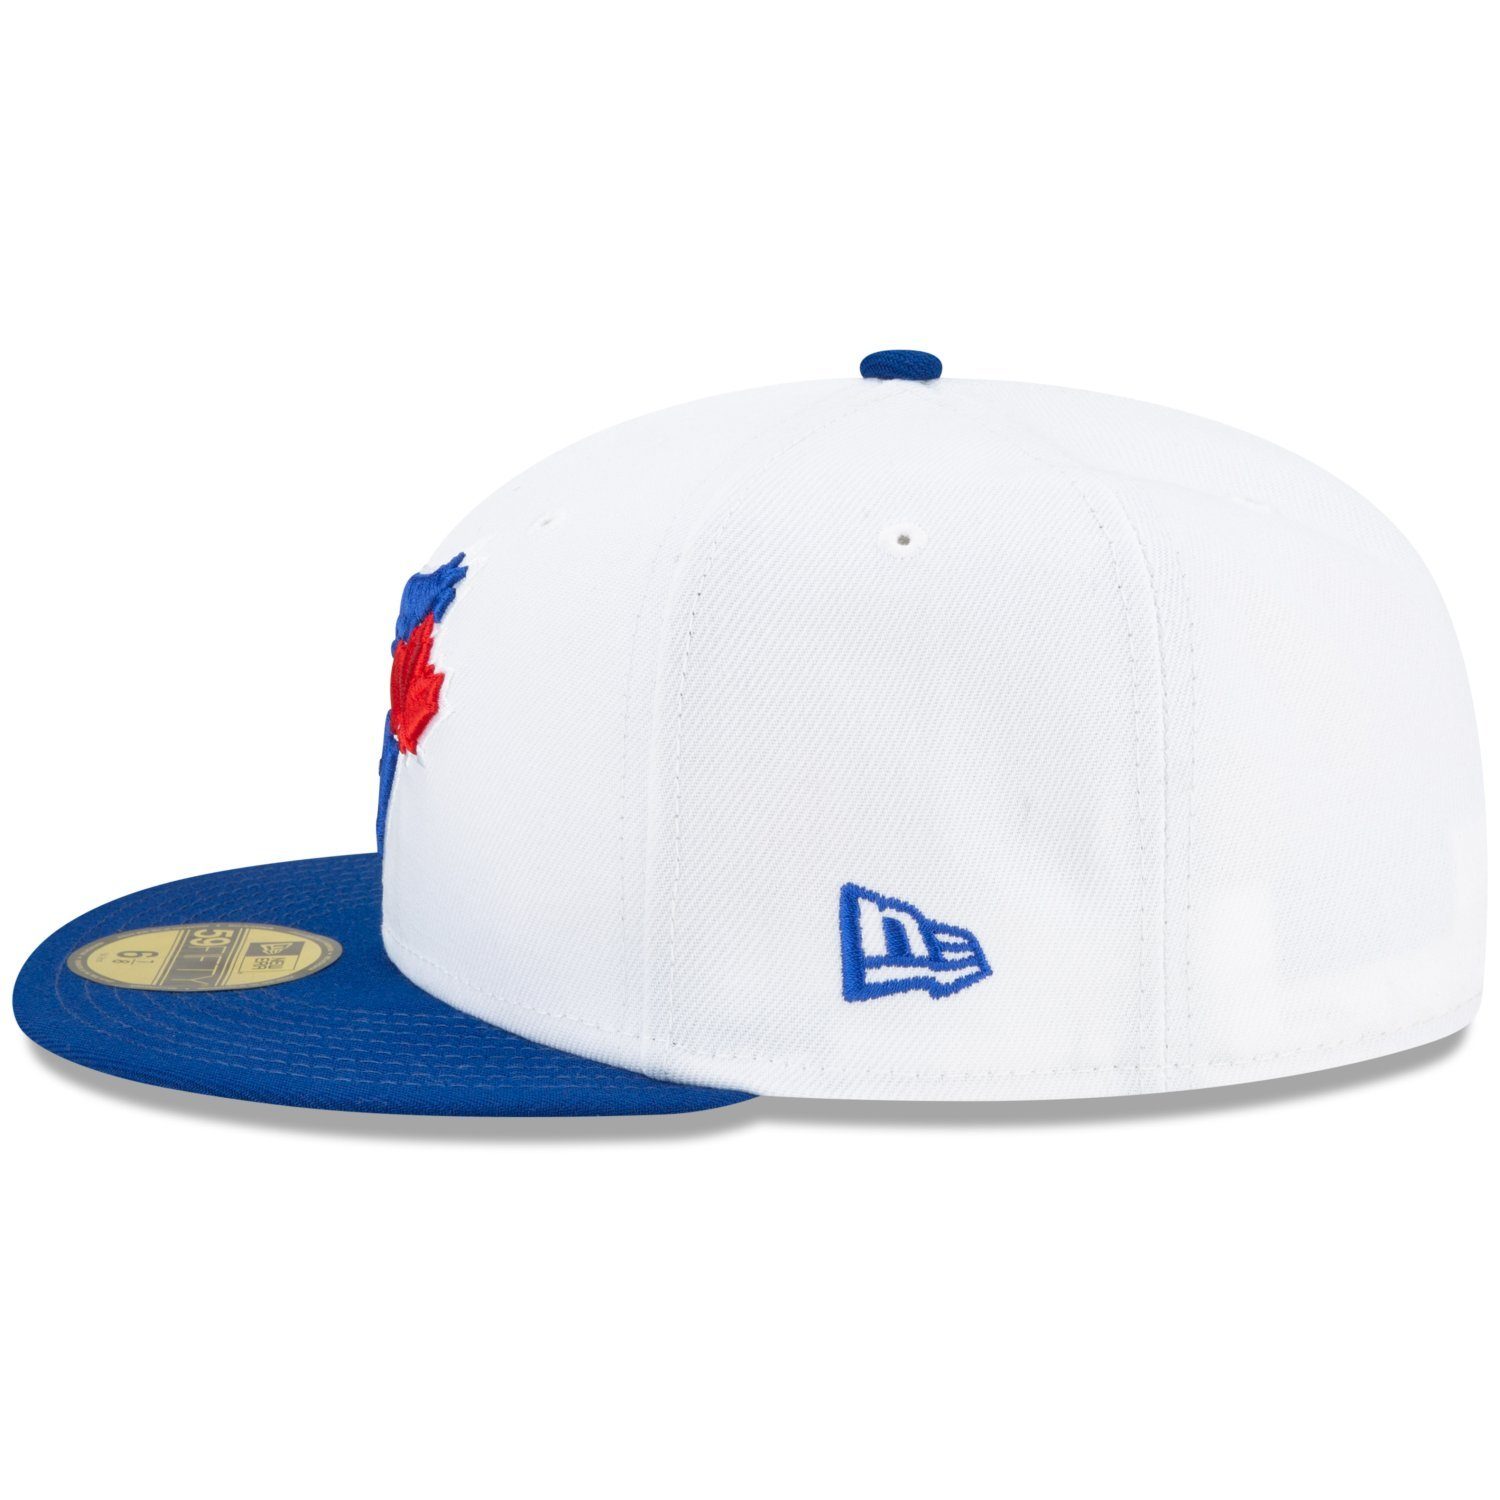 Fitted SERIES Cap 1993 New WORLD 59Fifty Jays Toronto Era